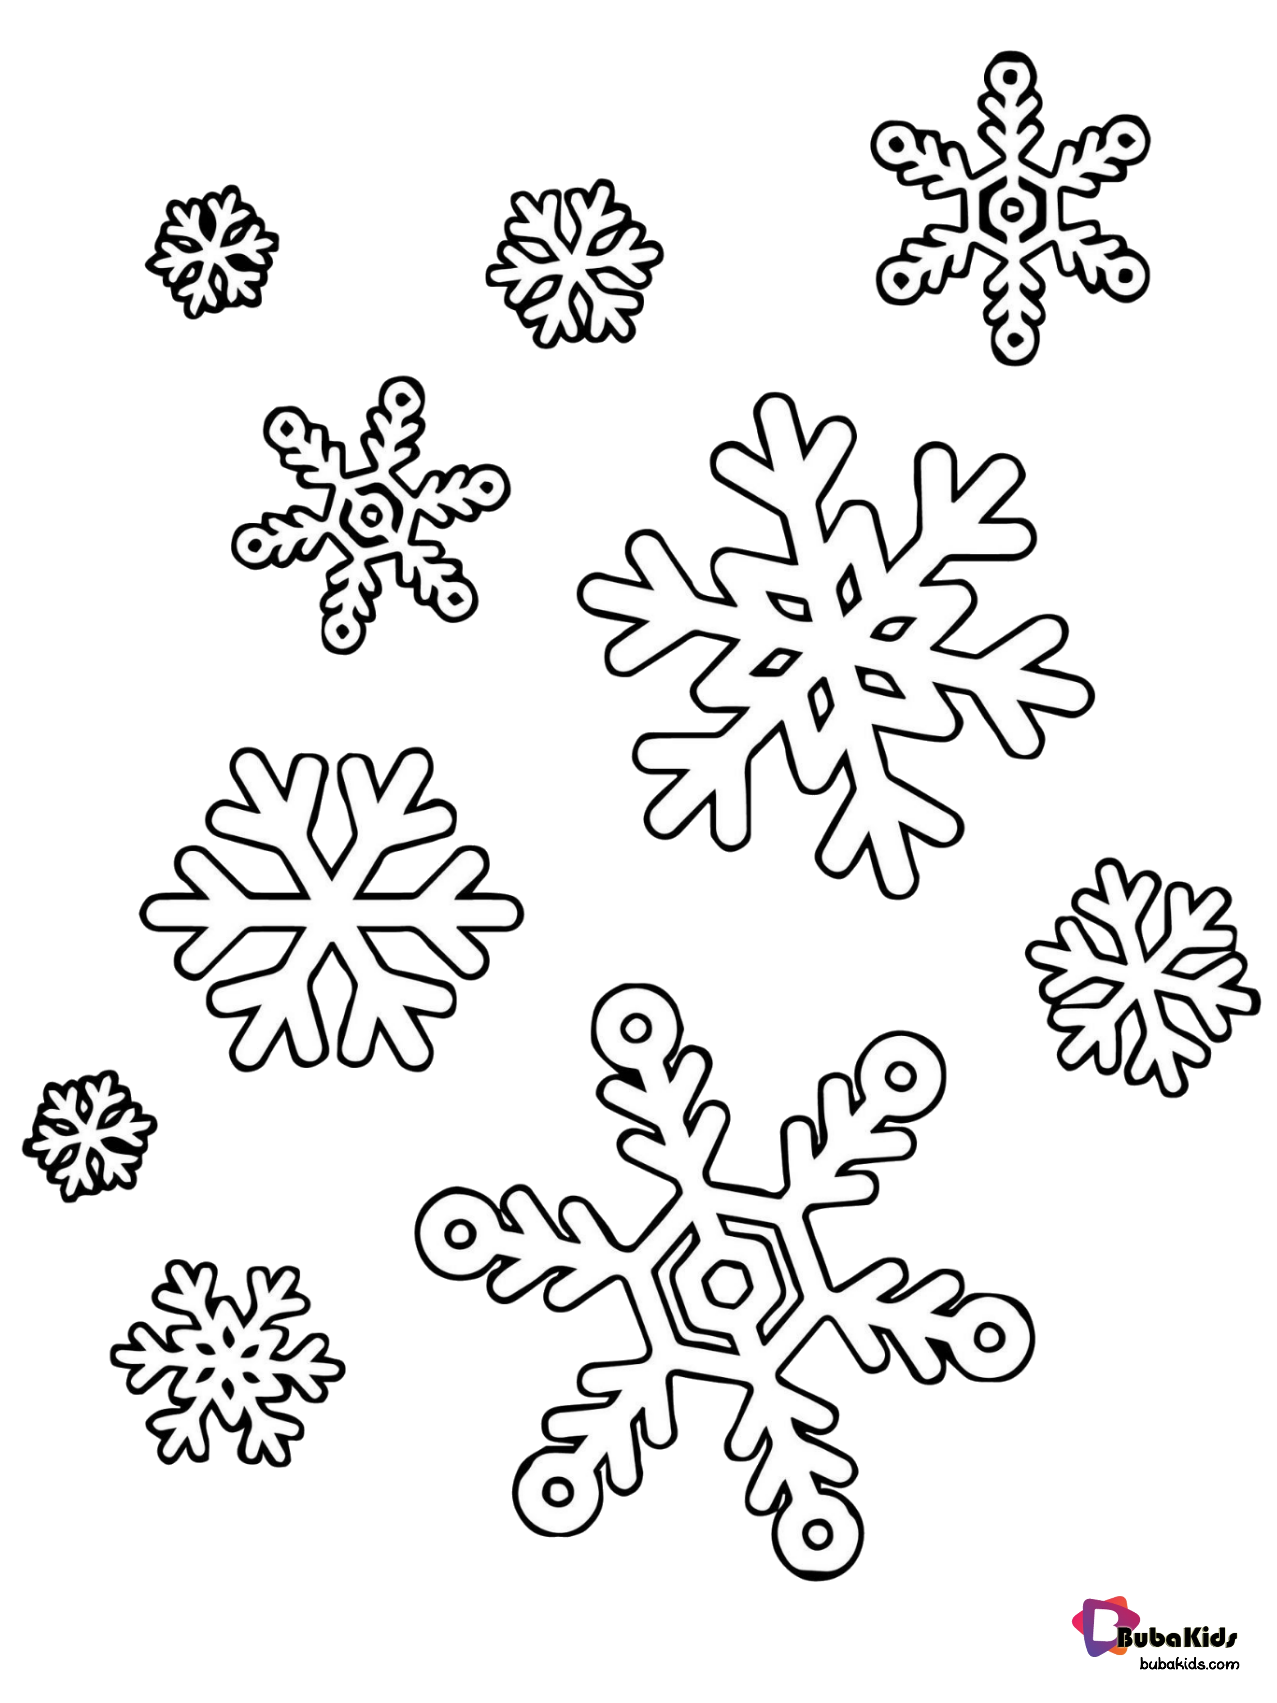 Winter snowflakes coloring page.